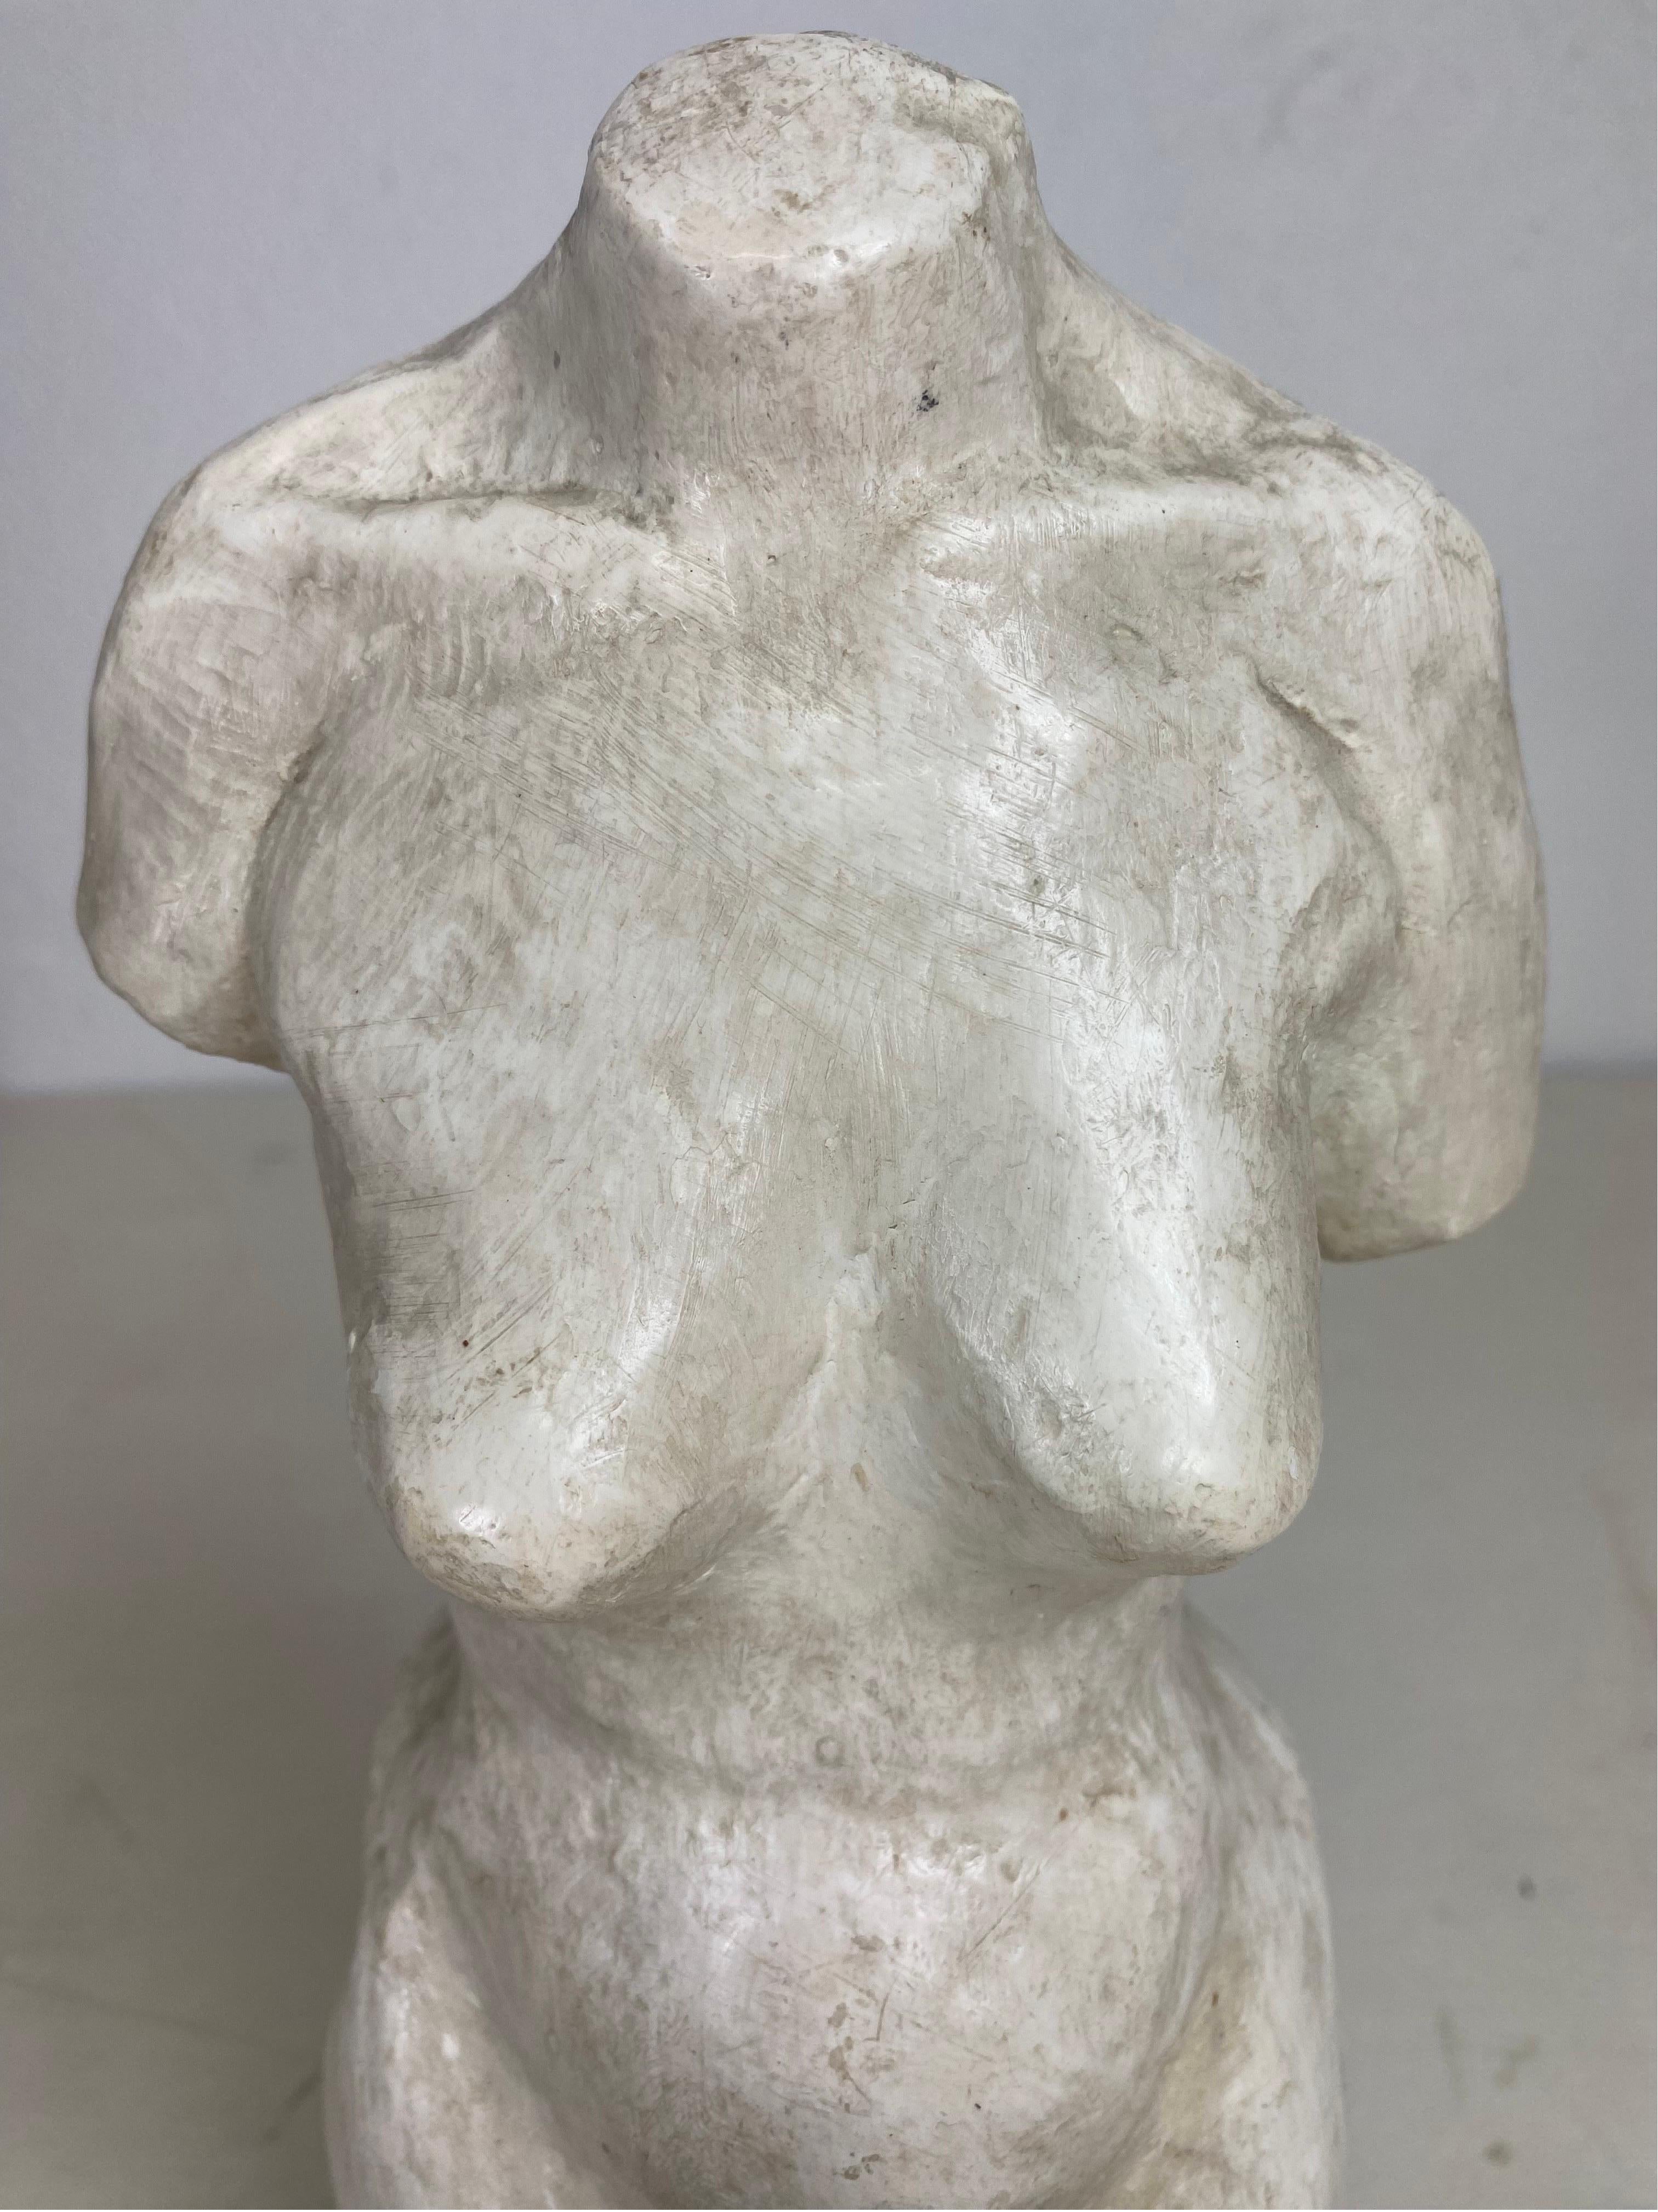 This is a mid century female nude study in plaster. This plaster sculpture stands on a dark walnut vase. The sculpture has a venetian plaster style finish to the surface of the sculpture. This is American made circa 1960.